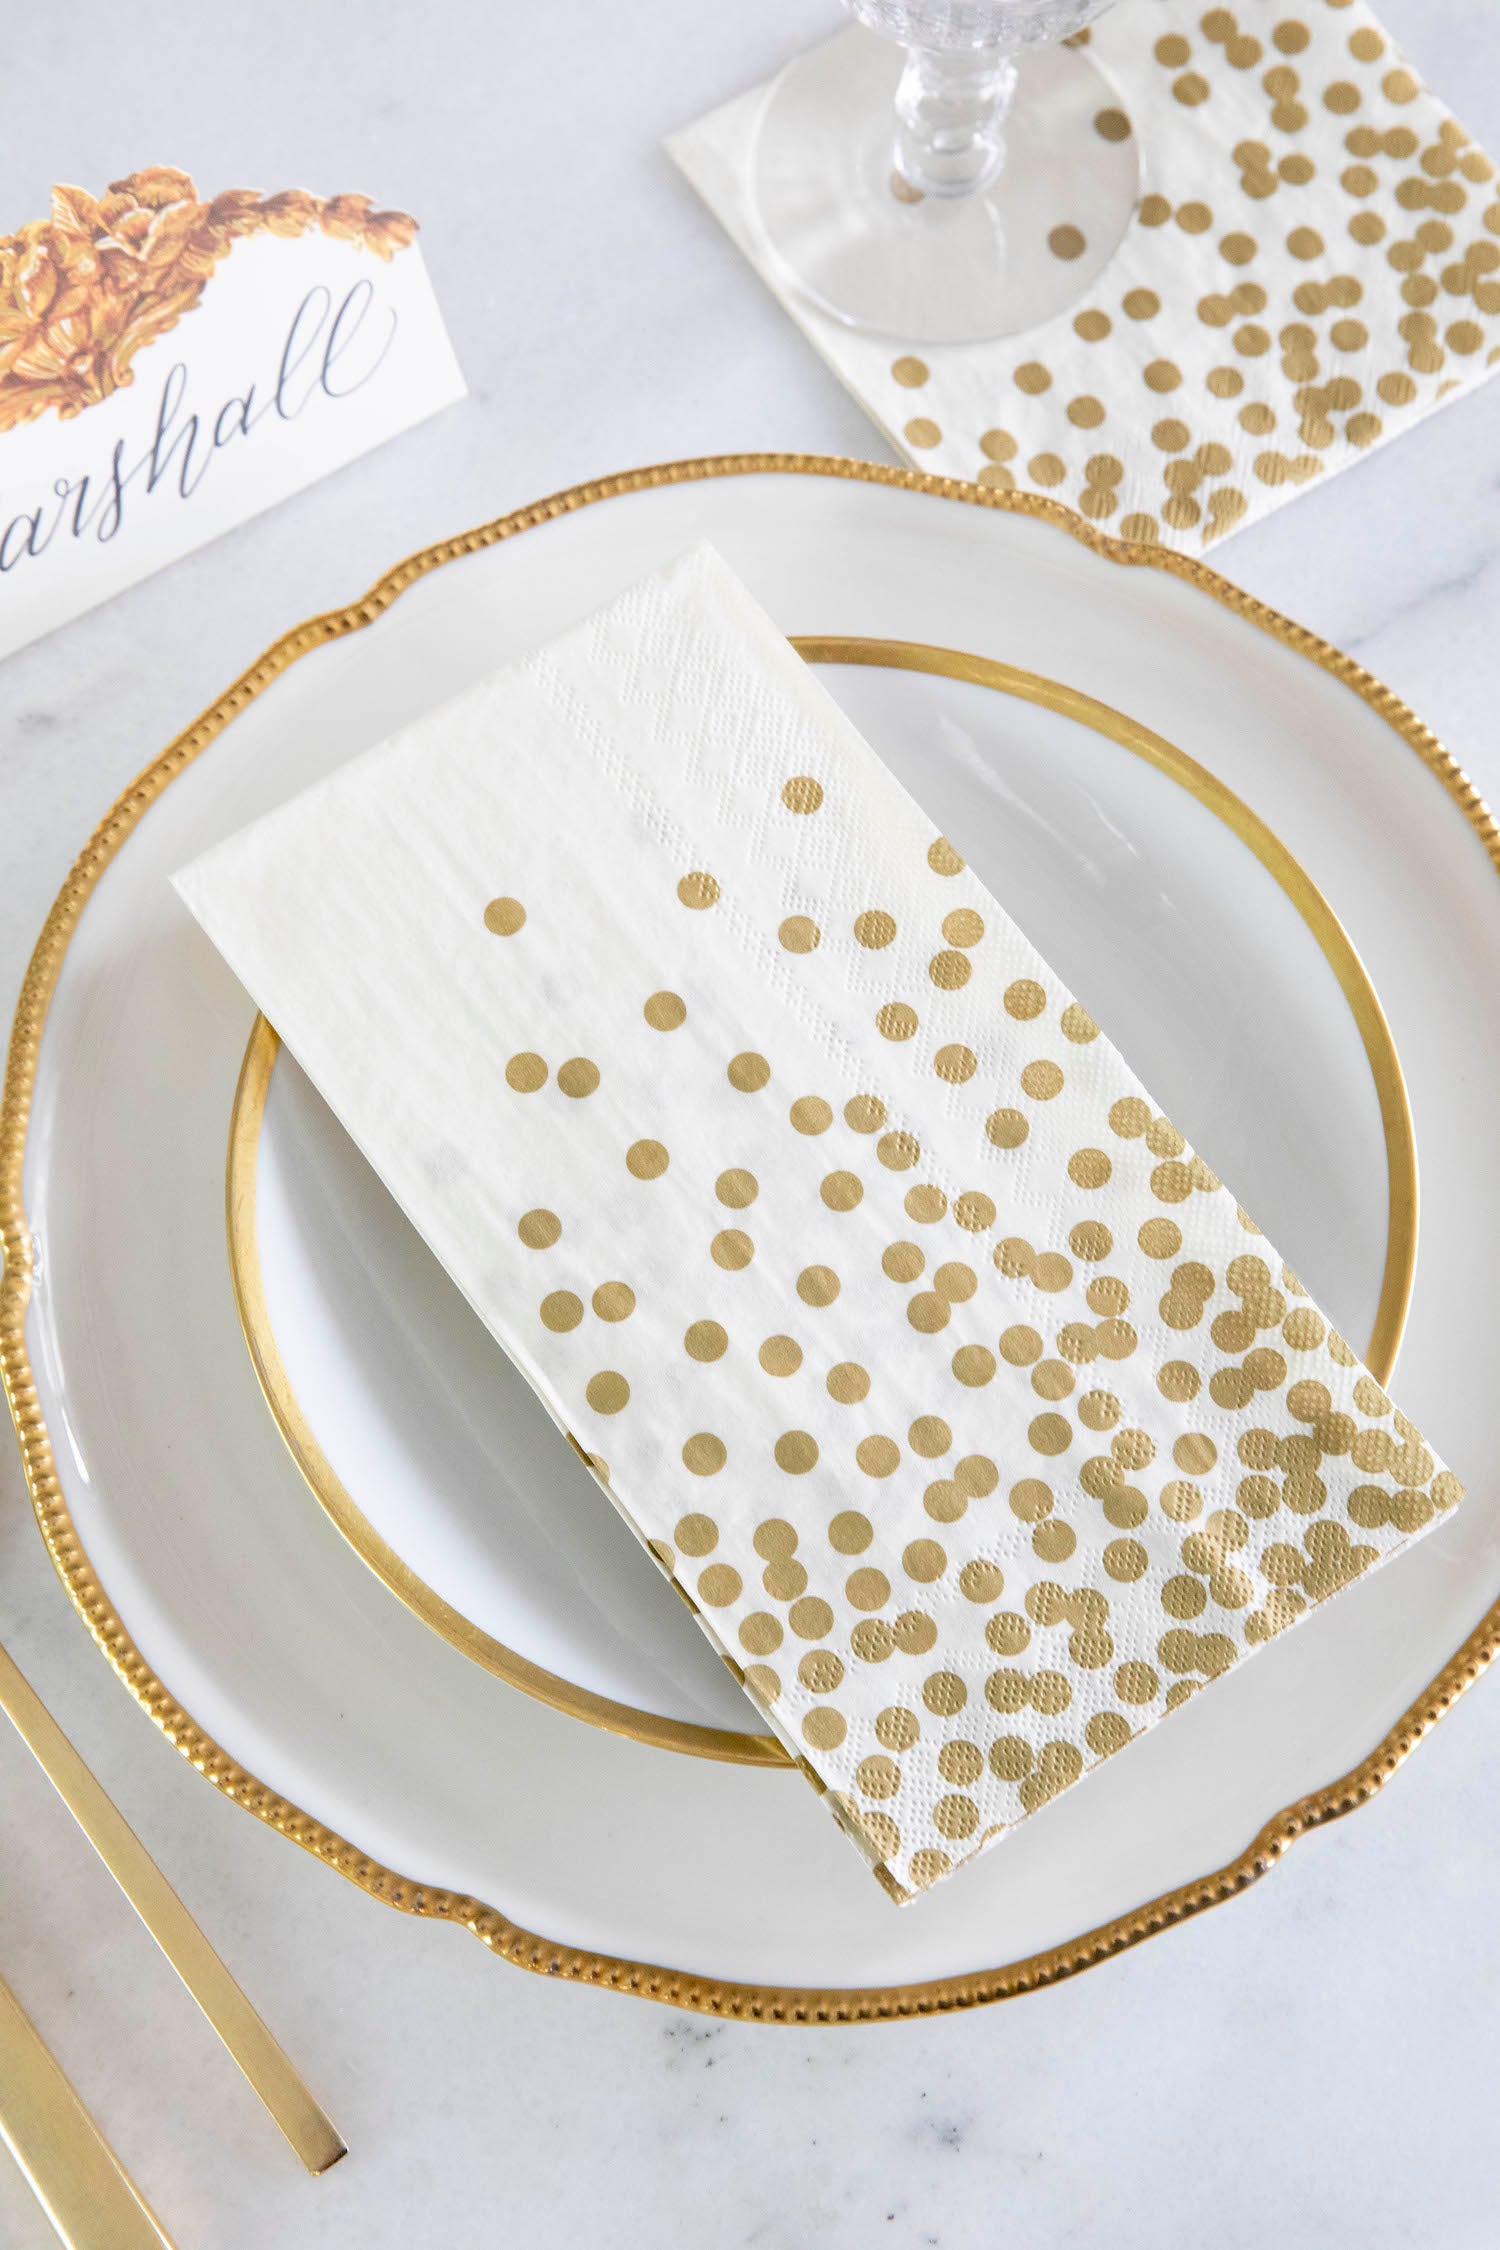 An elegant place setting featuring a Gold Confetti Guest Napkin on the plate, and a Gold Confetti Cocktail Napkin under the glass.